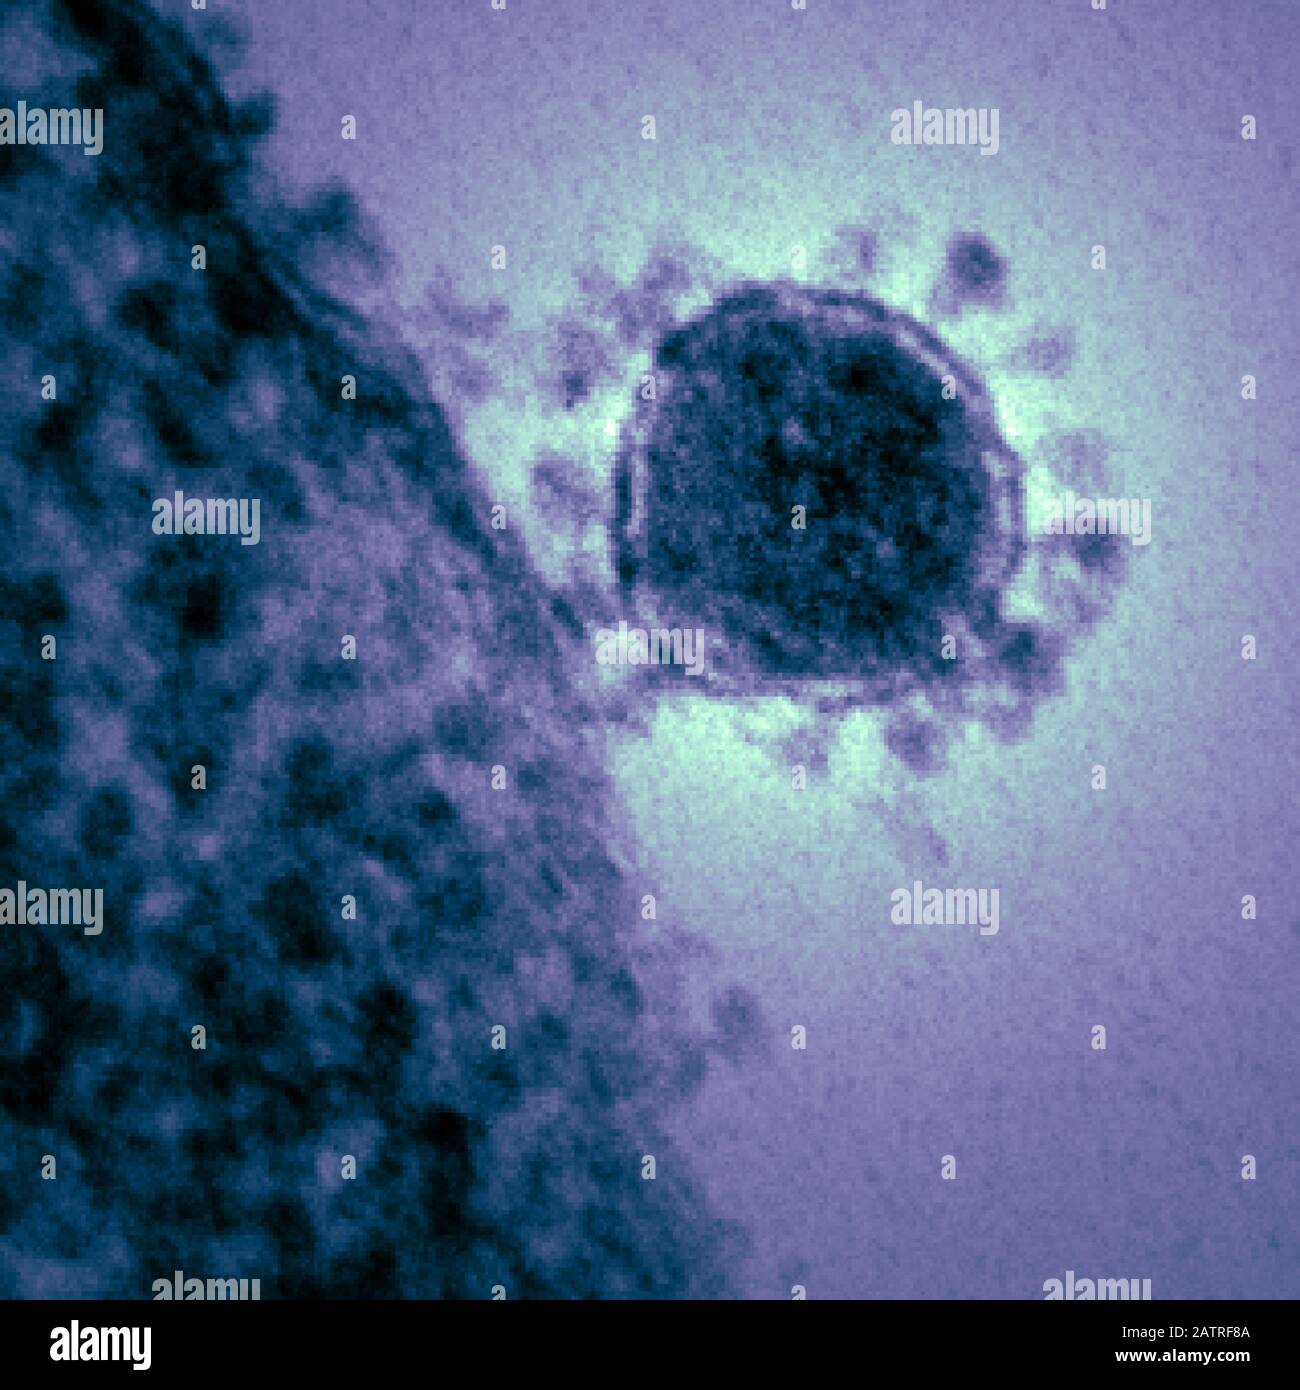 Highly magnified, digitally colorized transmission electron microscopic (TEM) image, showing ultrastructural details exhibited by a single, spherical shaped, Middle East respiratory syndrome coronavirus (MERS-CoV) virion, 2014. MERs is in the same family as the novel coronavirus which began to infect patients in Wuhan, China in early 2020. Courtesy National Institute of Allergy and Infectious Diseases (NIAID)/CDC. Image produced in 2014. () Stock Photo